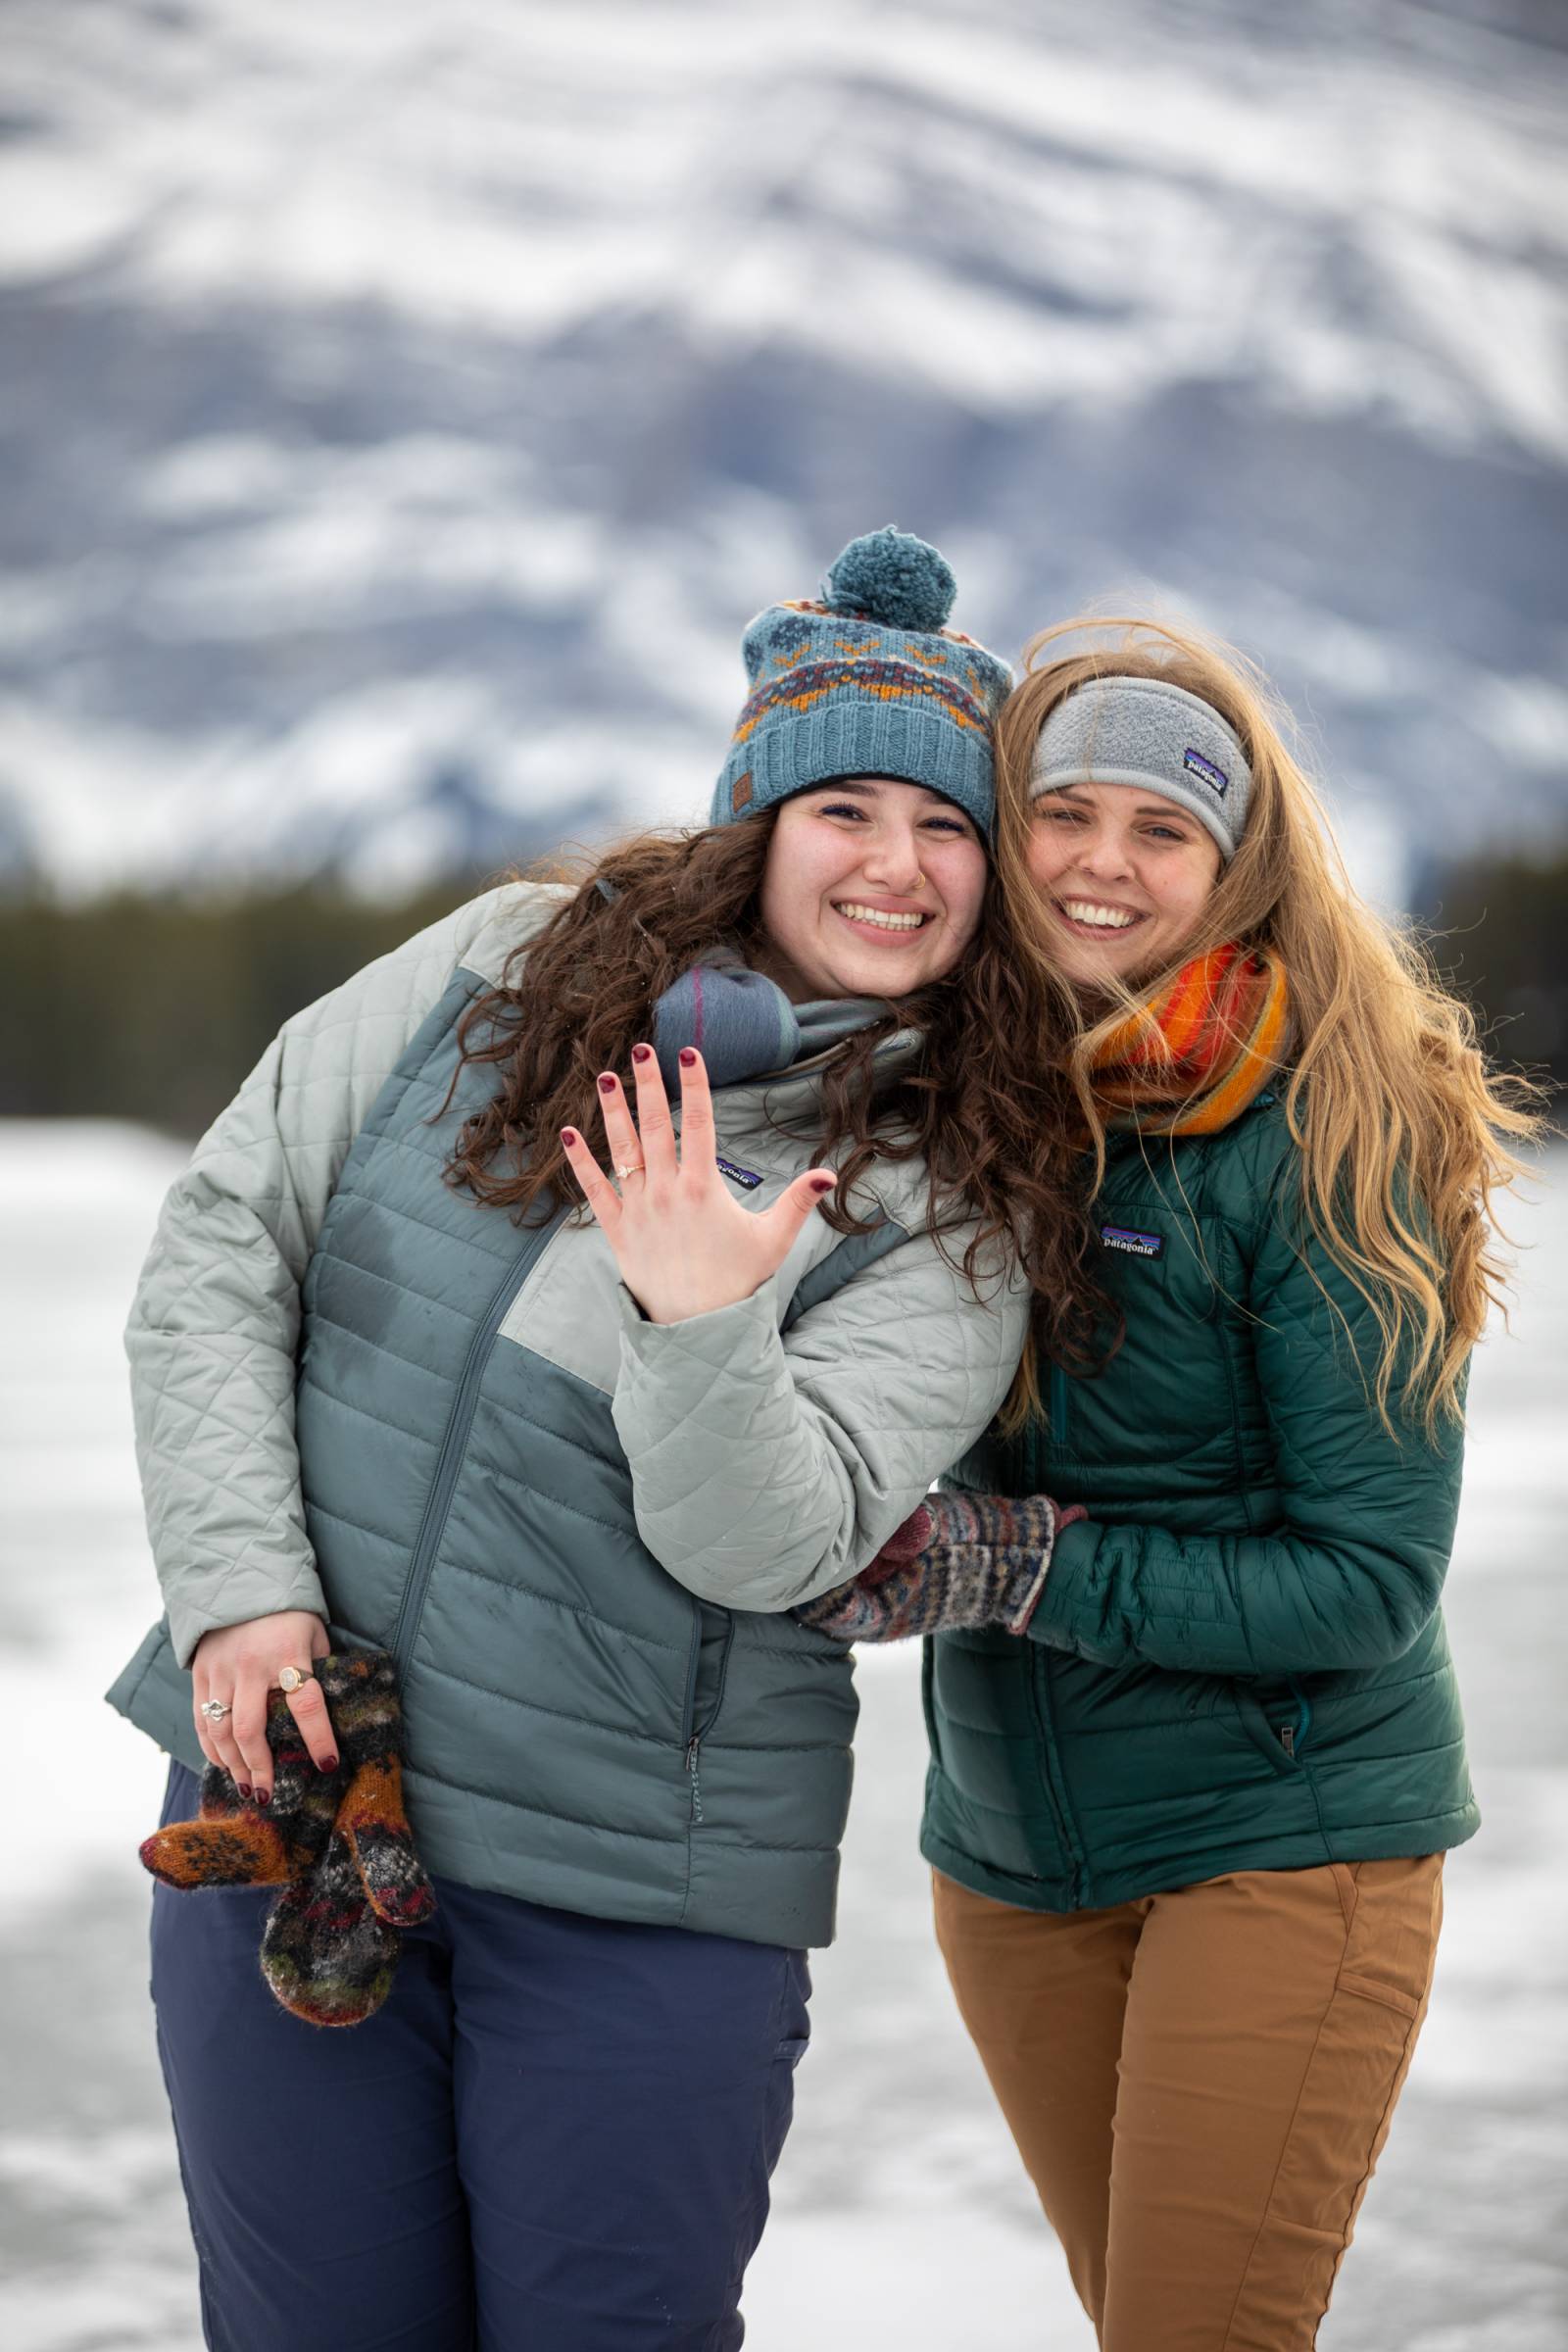 Banff Engagement Photographers, Canmore Engagement Photographers, Surprise proposal photographers